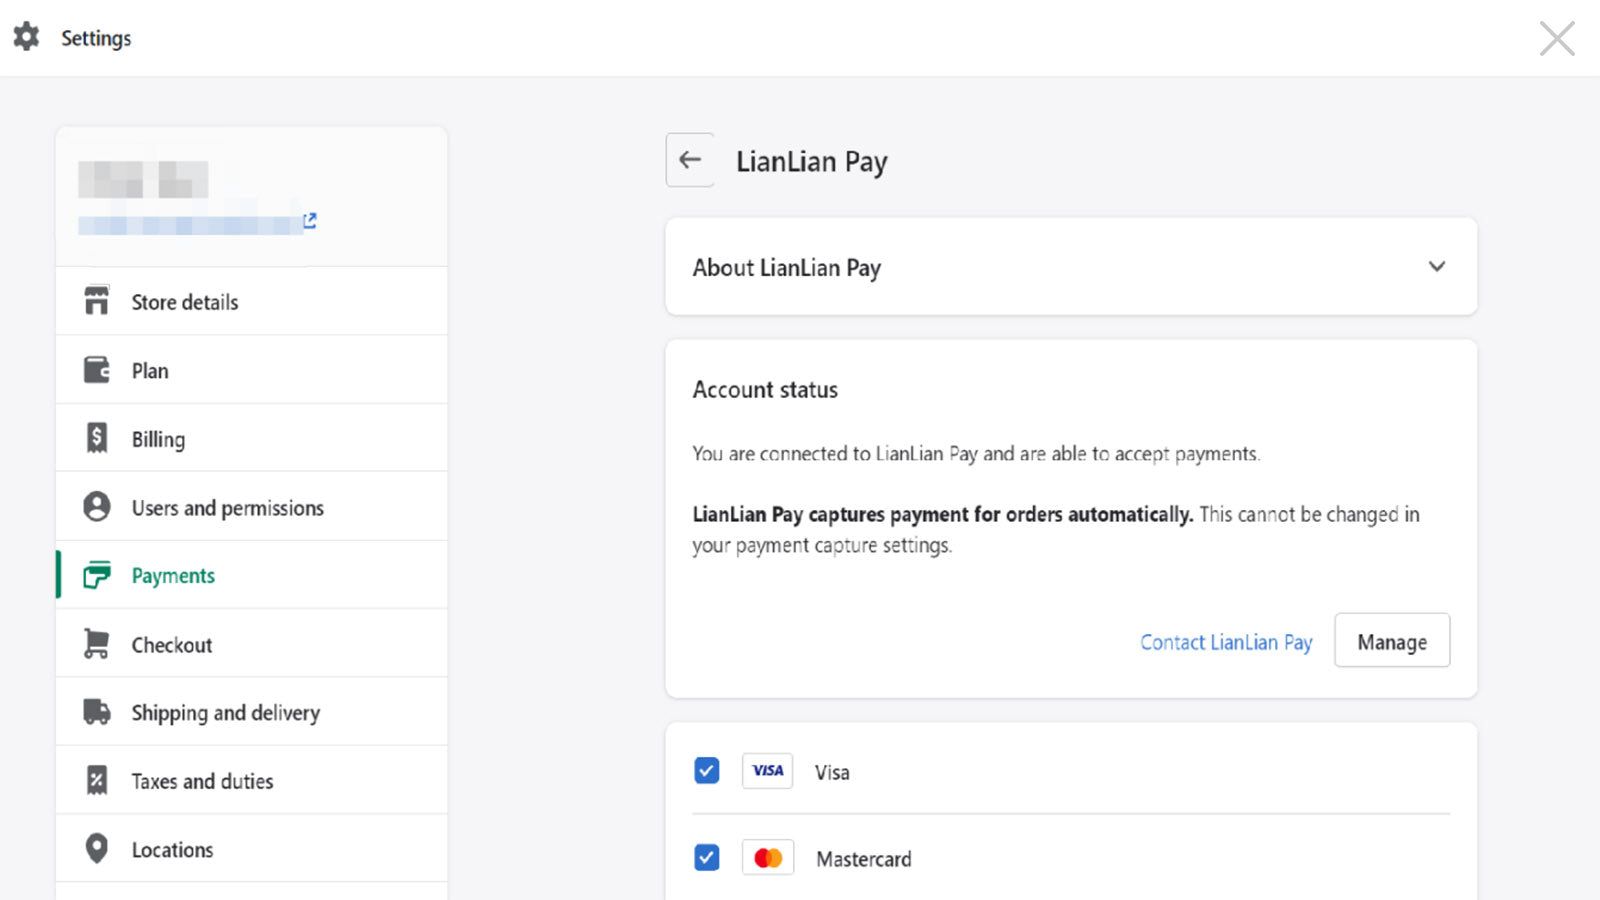 Install and activate LianLian Pay